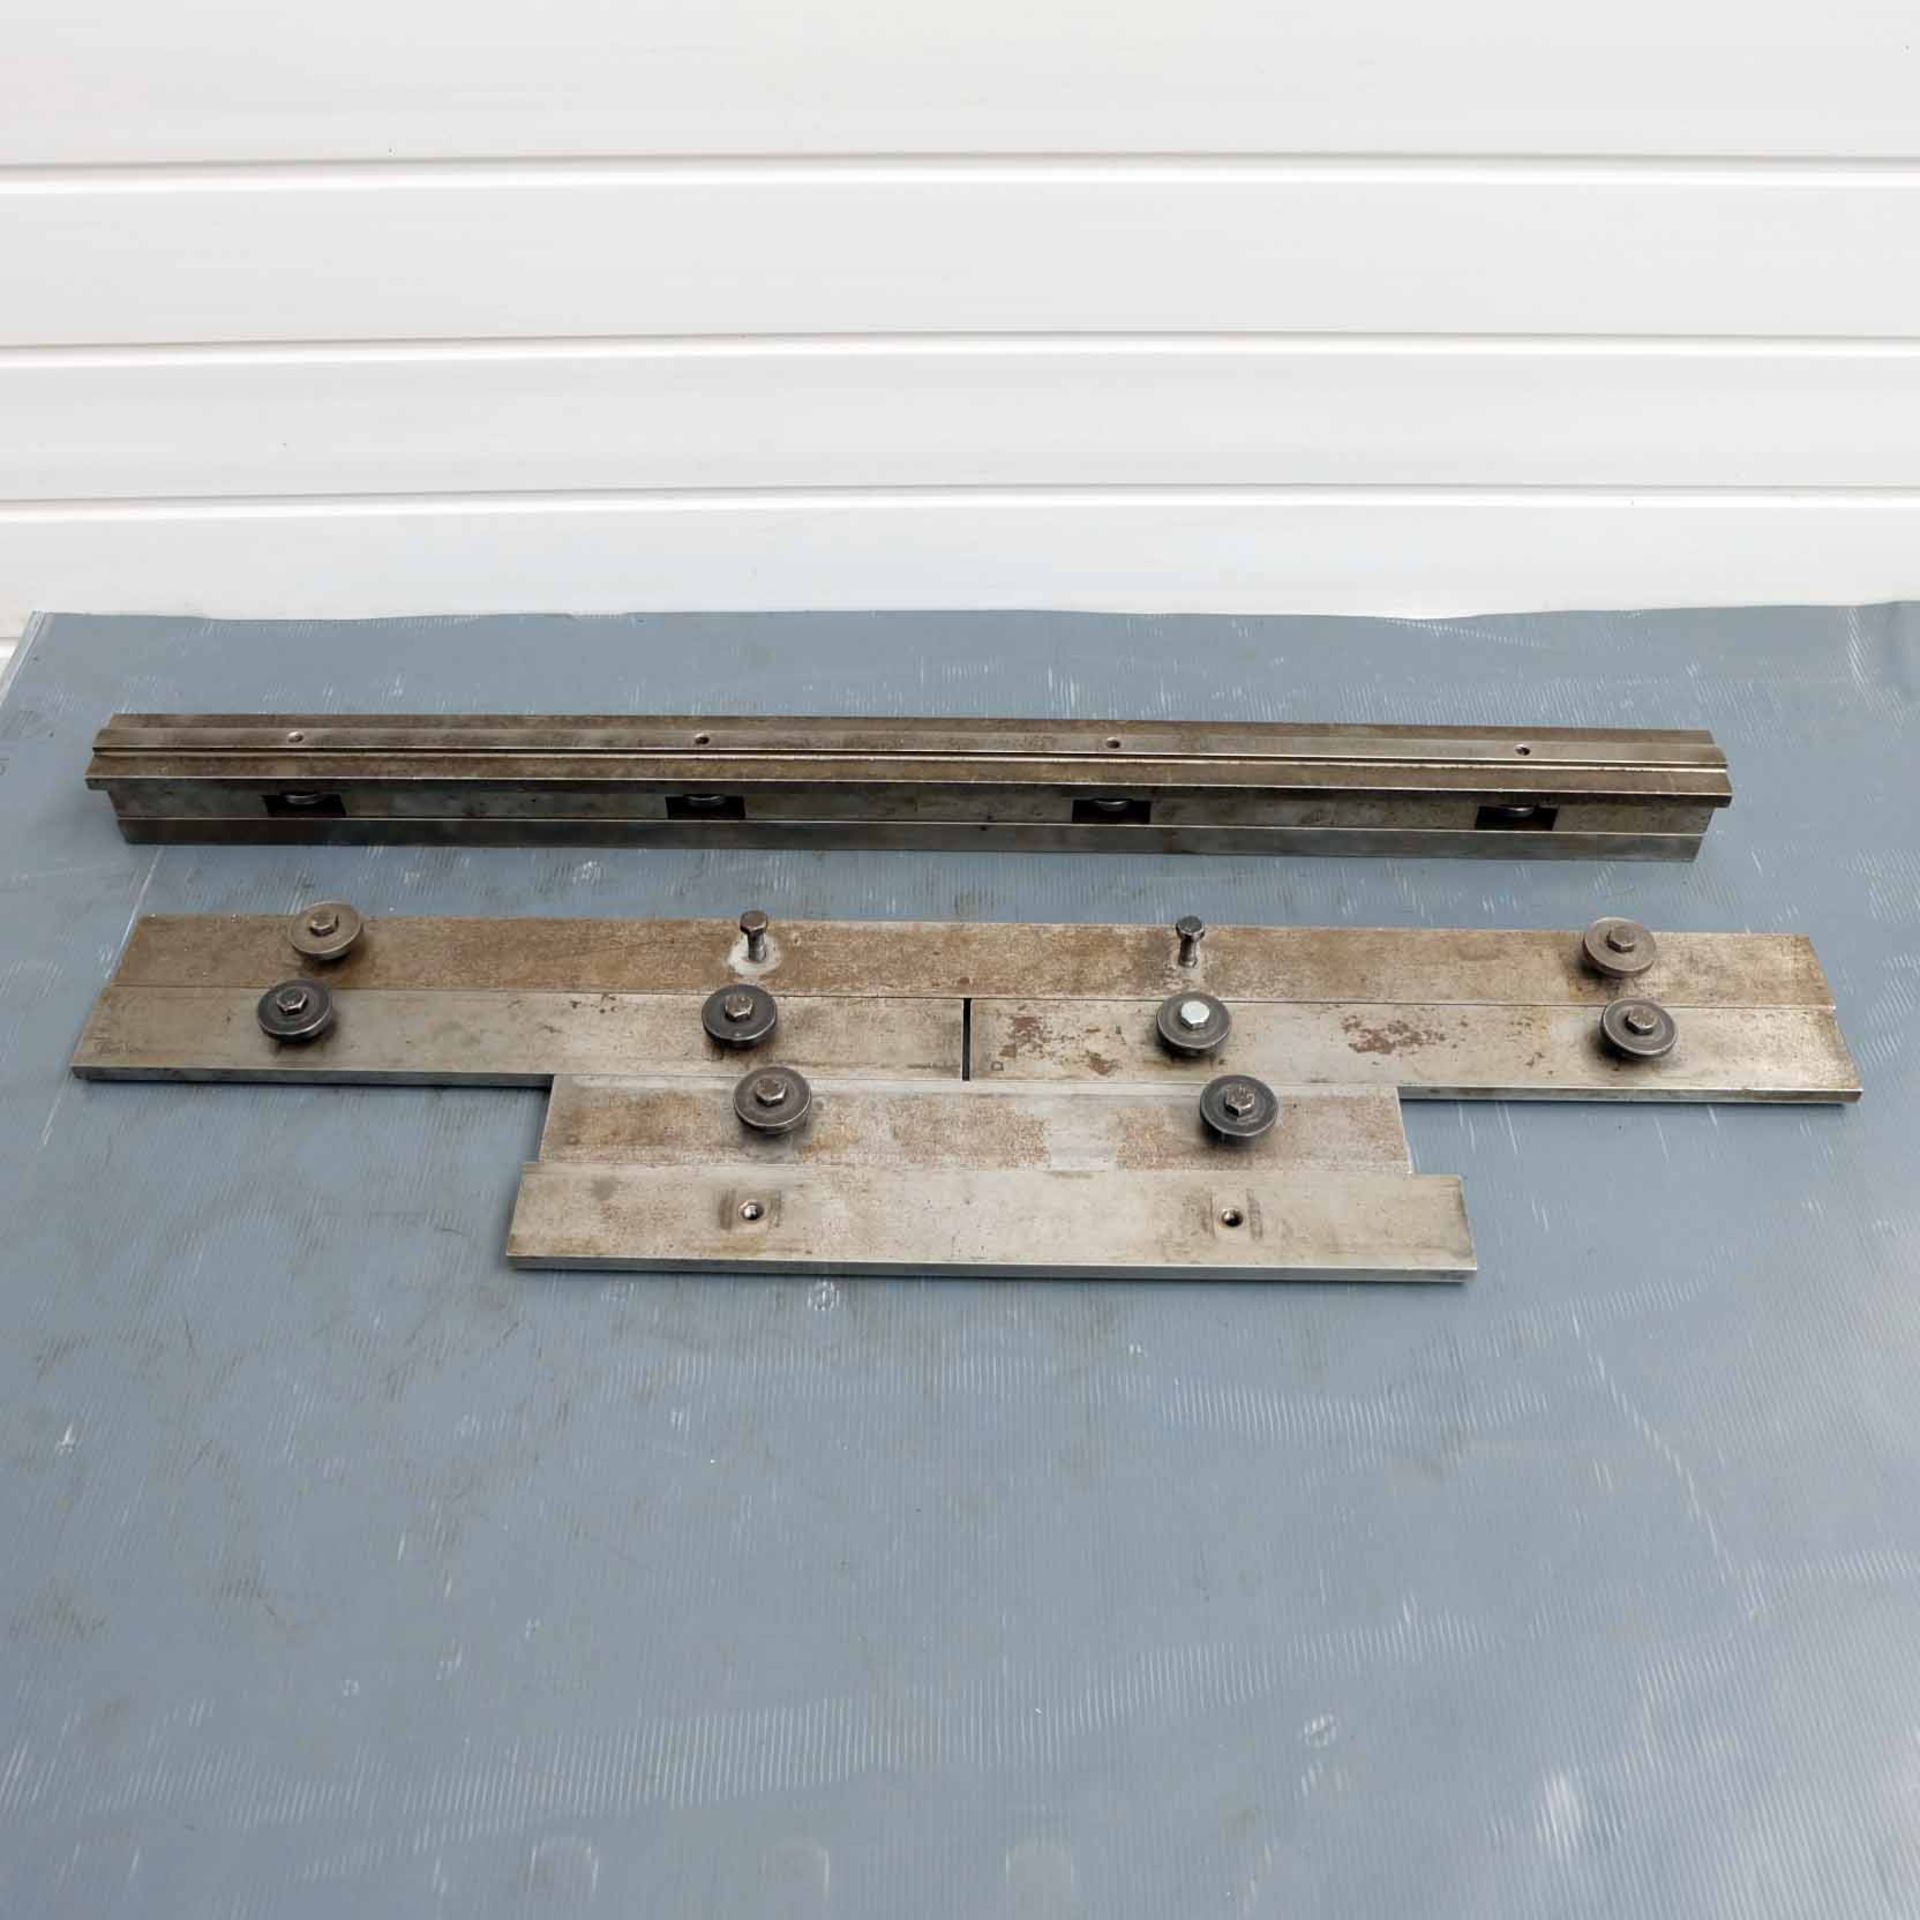 Tecnostamp 20.287 H-10 Base Clamps. Lengths 835mm on Base. 835mm, 390mm & 3 x 415mm Without Bases. - Image 4 of 5